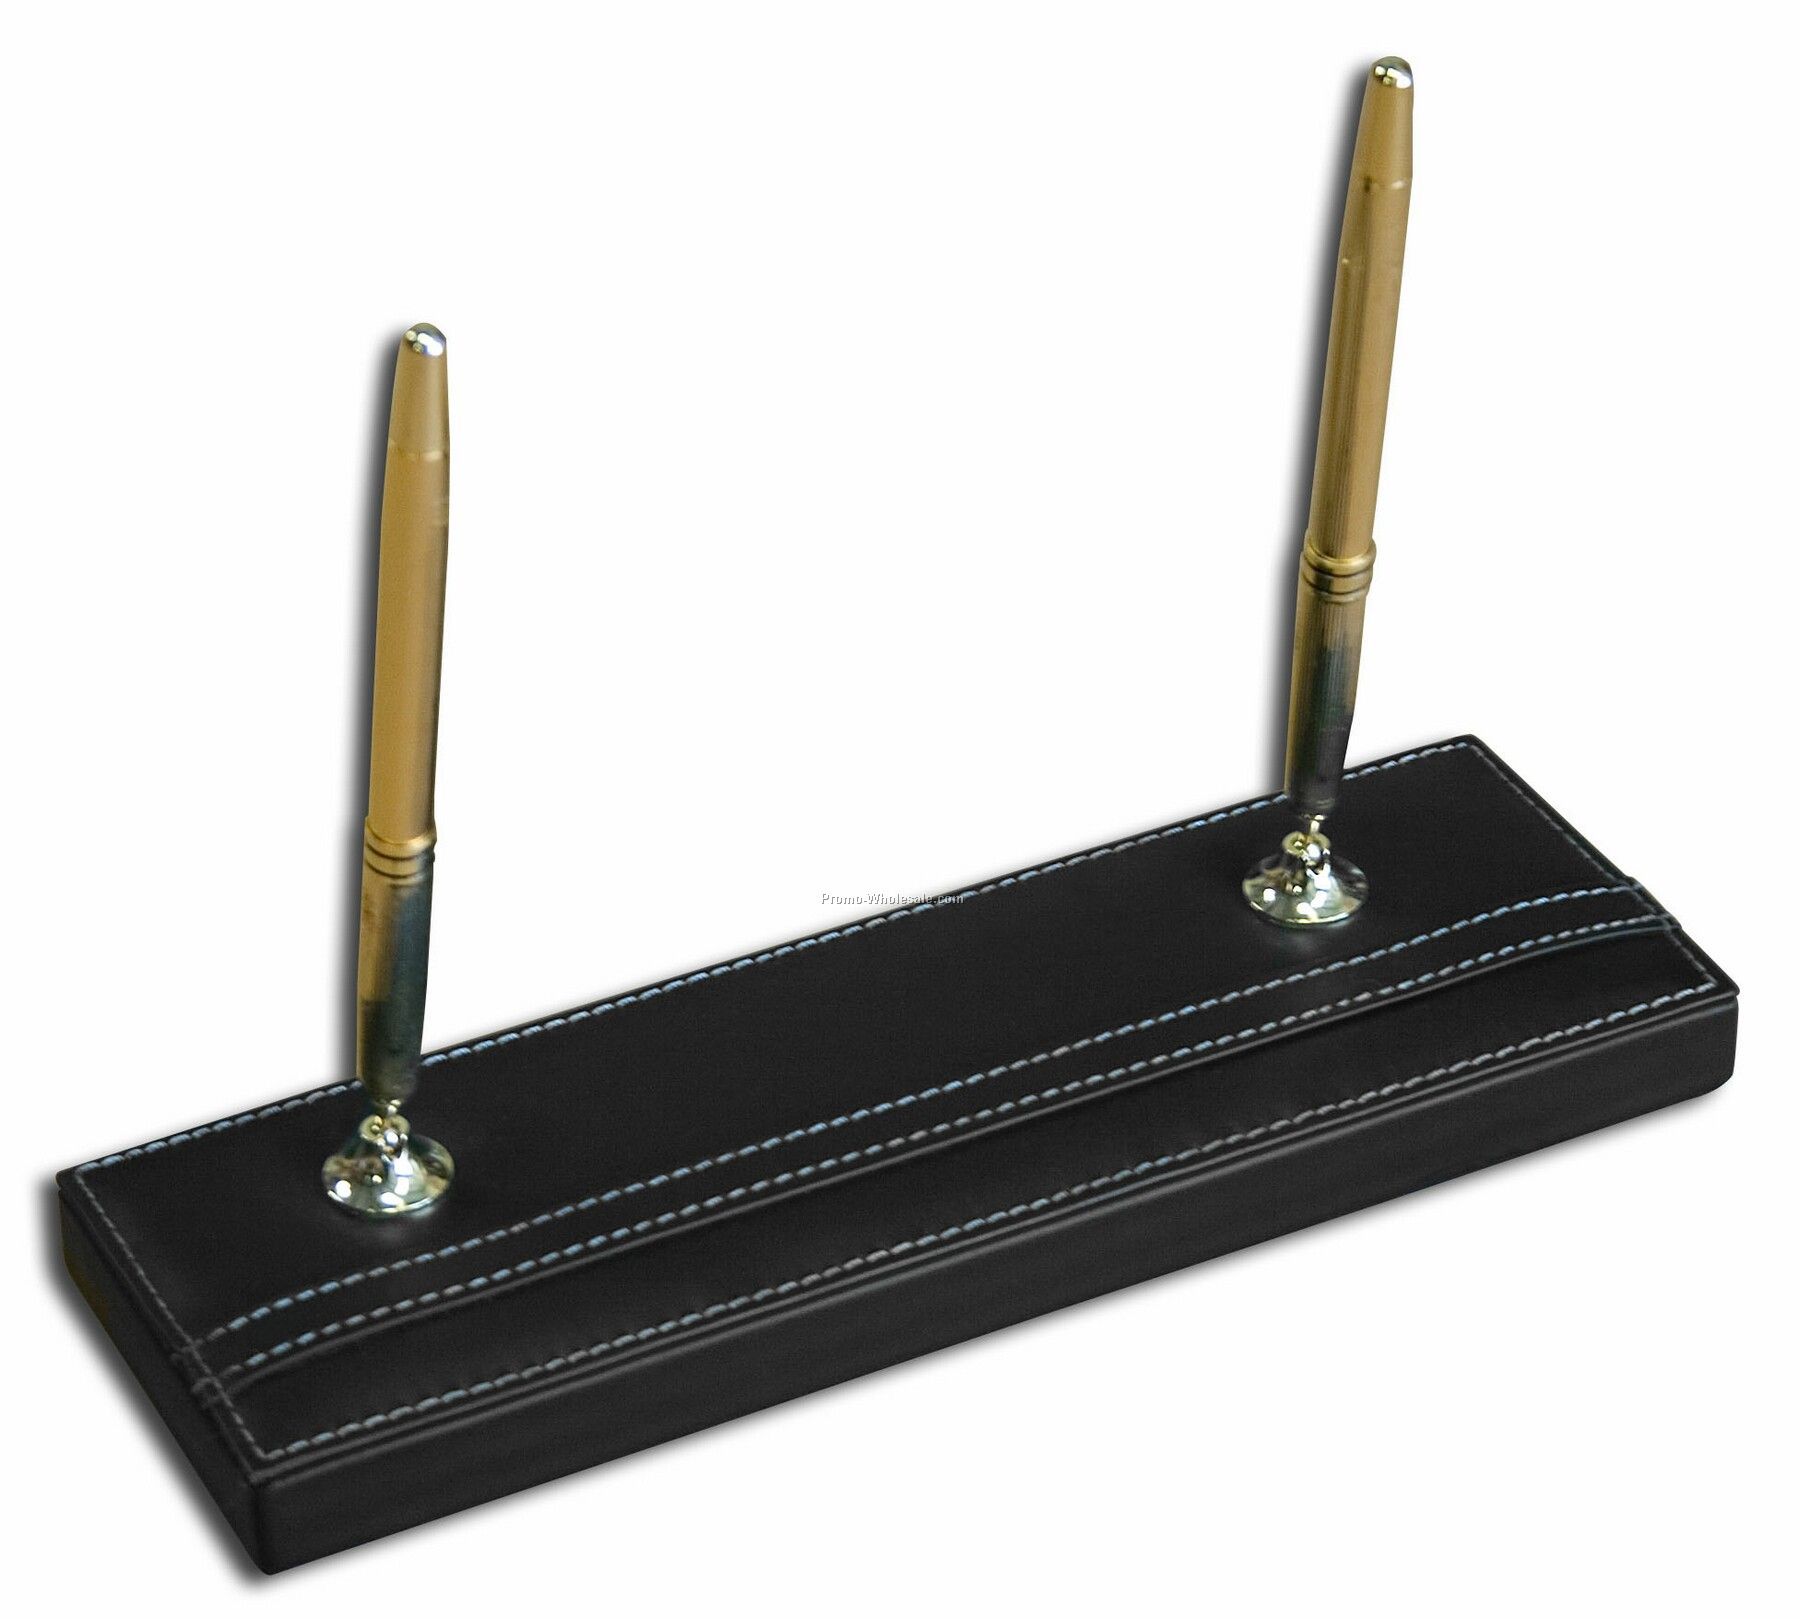 Leather Double Pen Holder - Black With Gold Accents